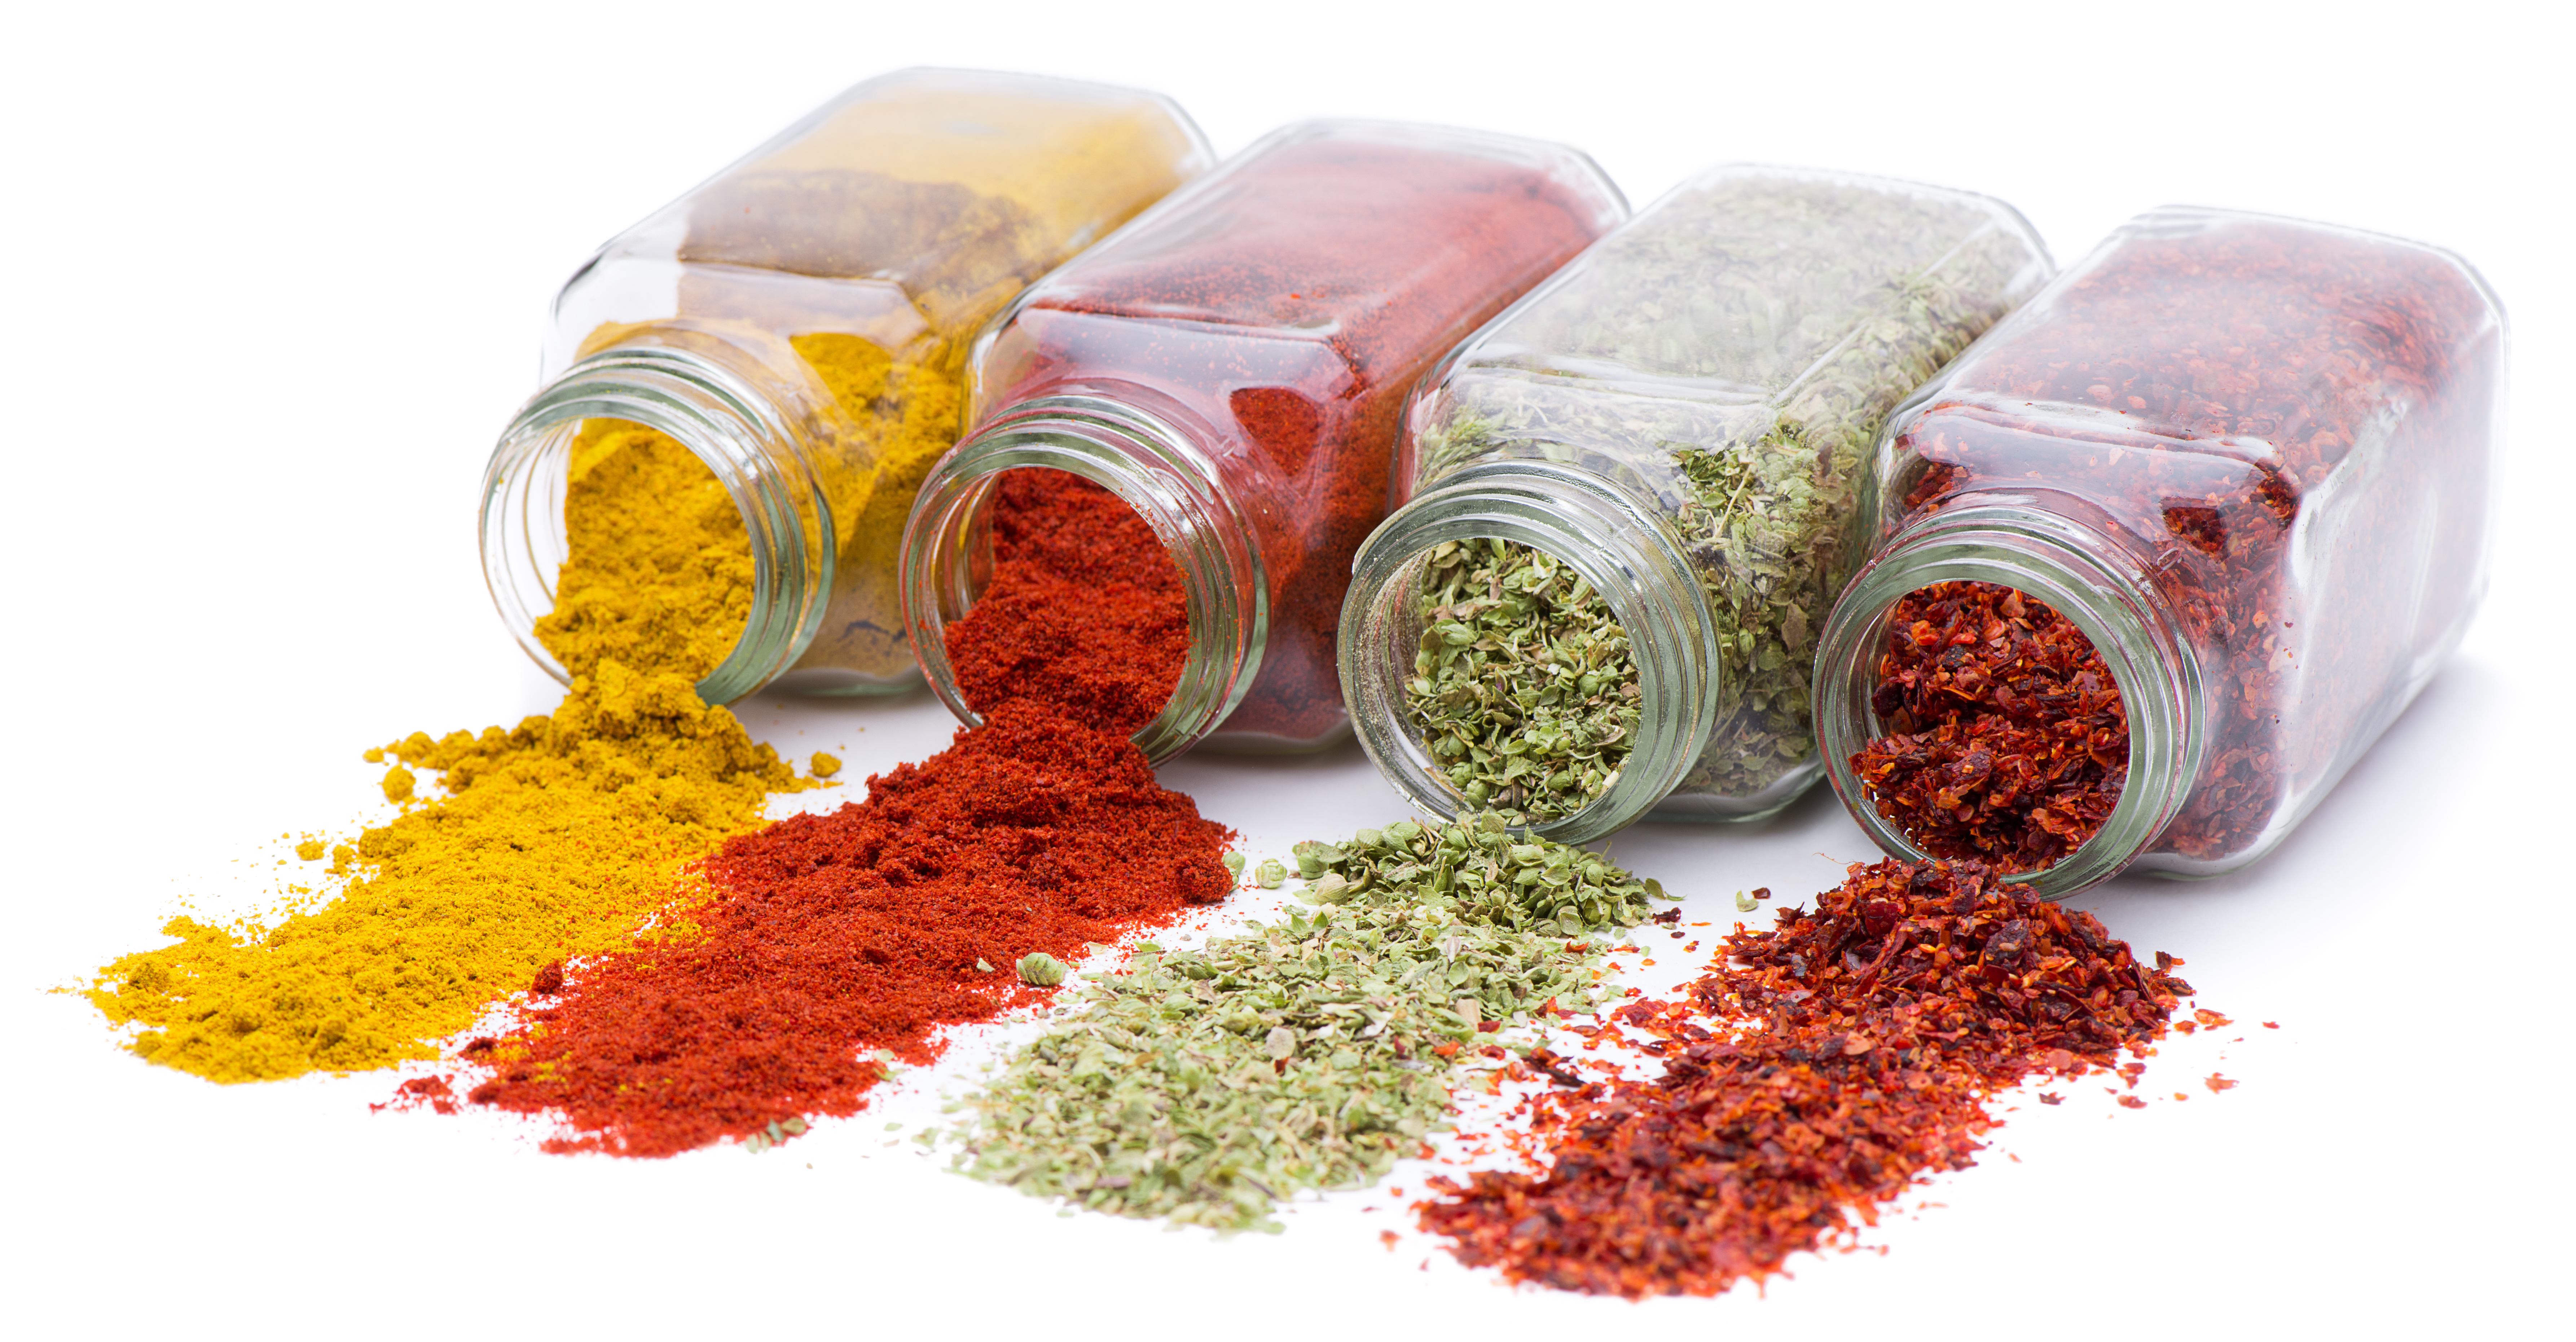 Food Herbs And Spices 7142x3722